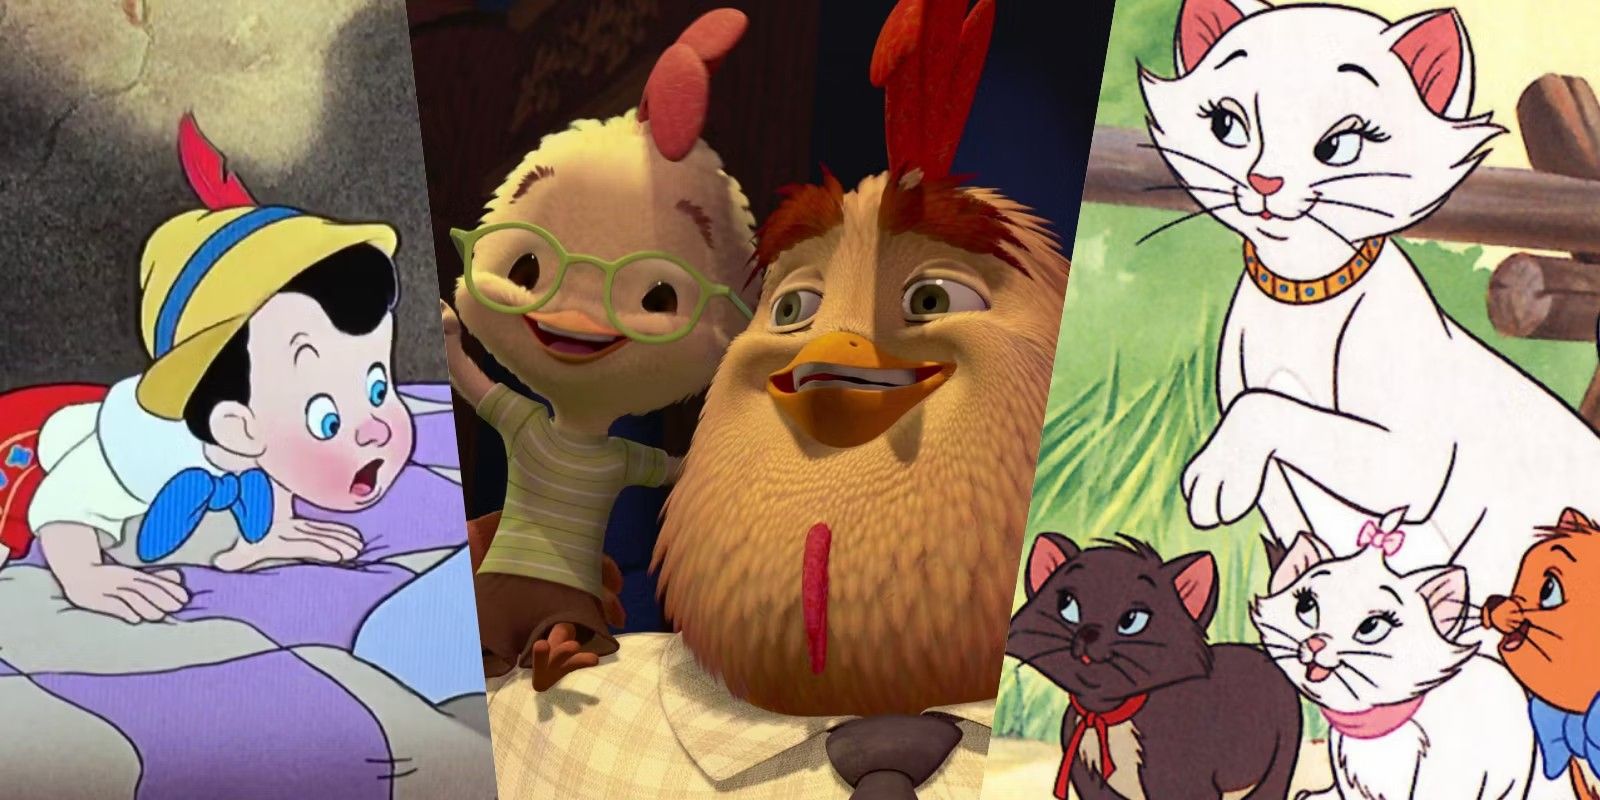 Collage of Pinocchio, Chicken Little, and Aristocats